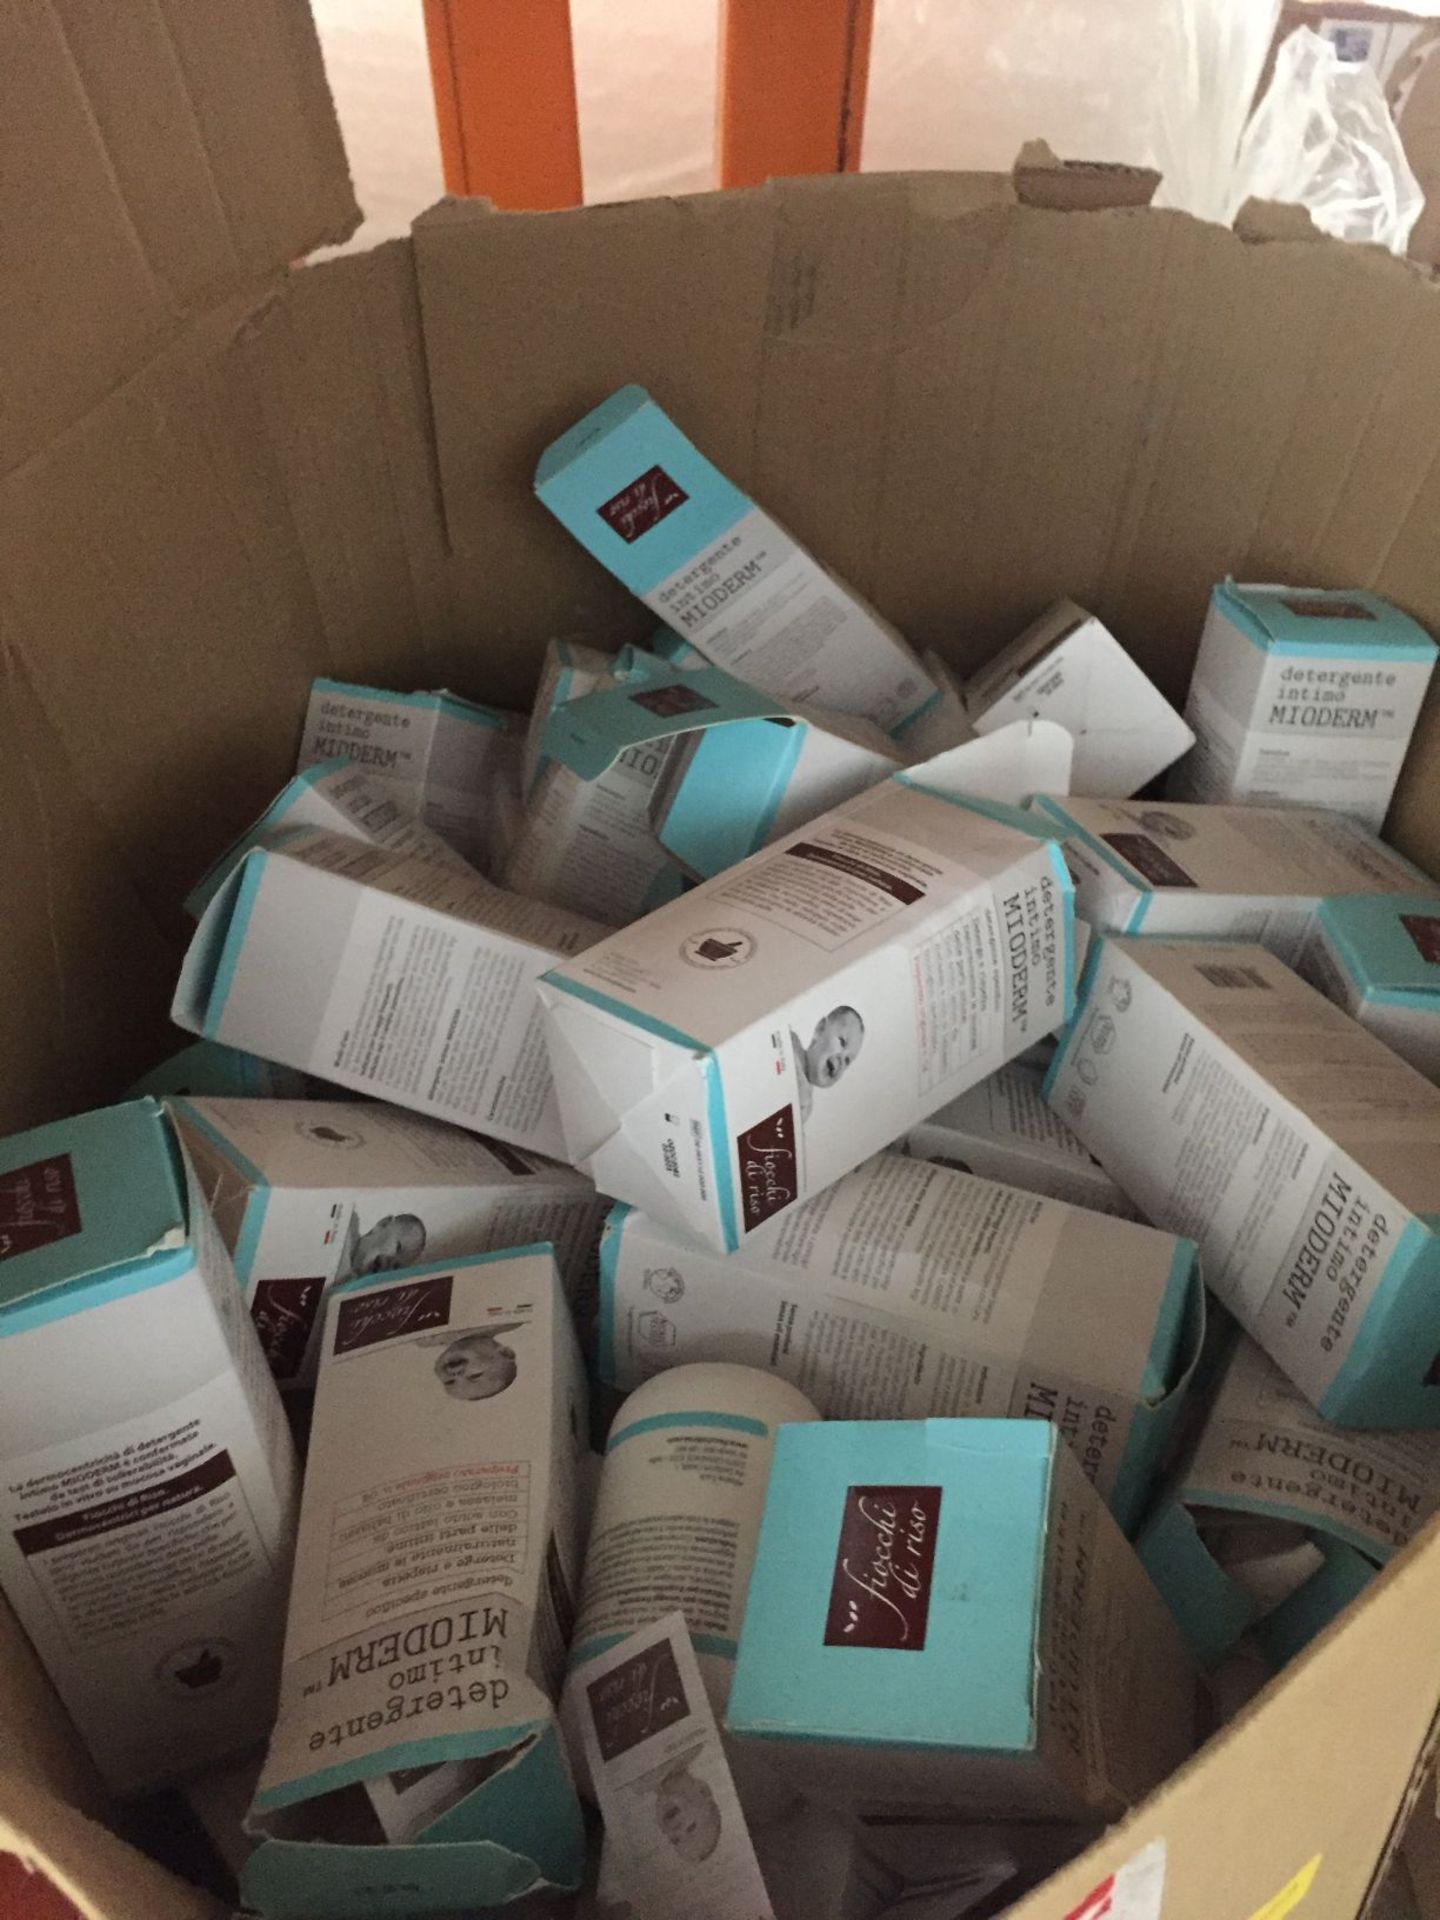 1 X BOX OF APPROXIMATELY 75 BOTTLES OF MIODERM INTIMATE CLEANSER, BB OCT 2023 / RRP £750.00 / GRADE